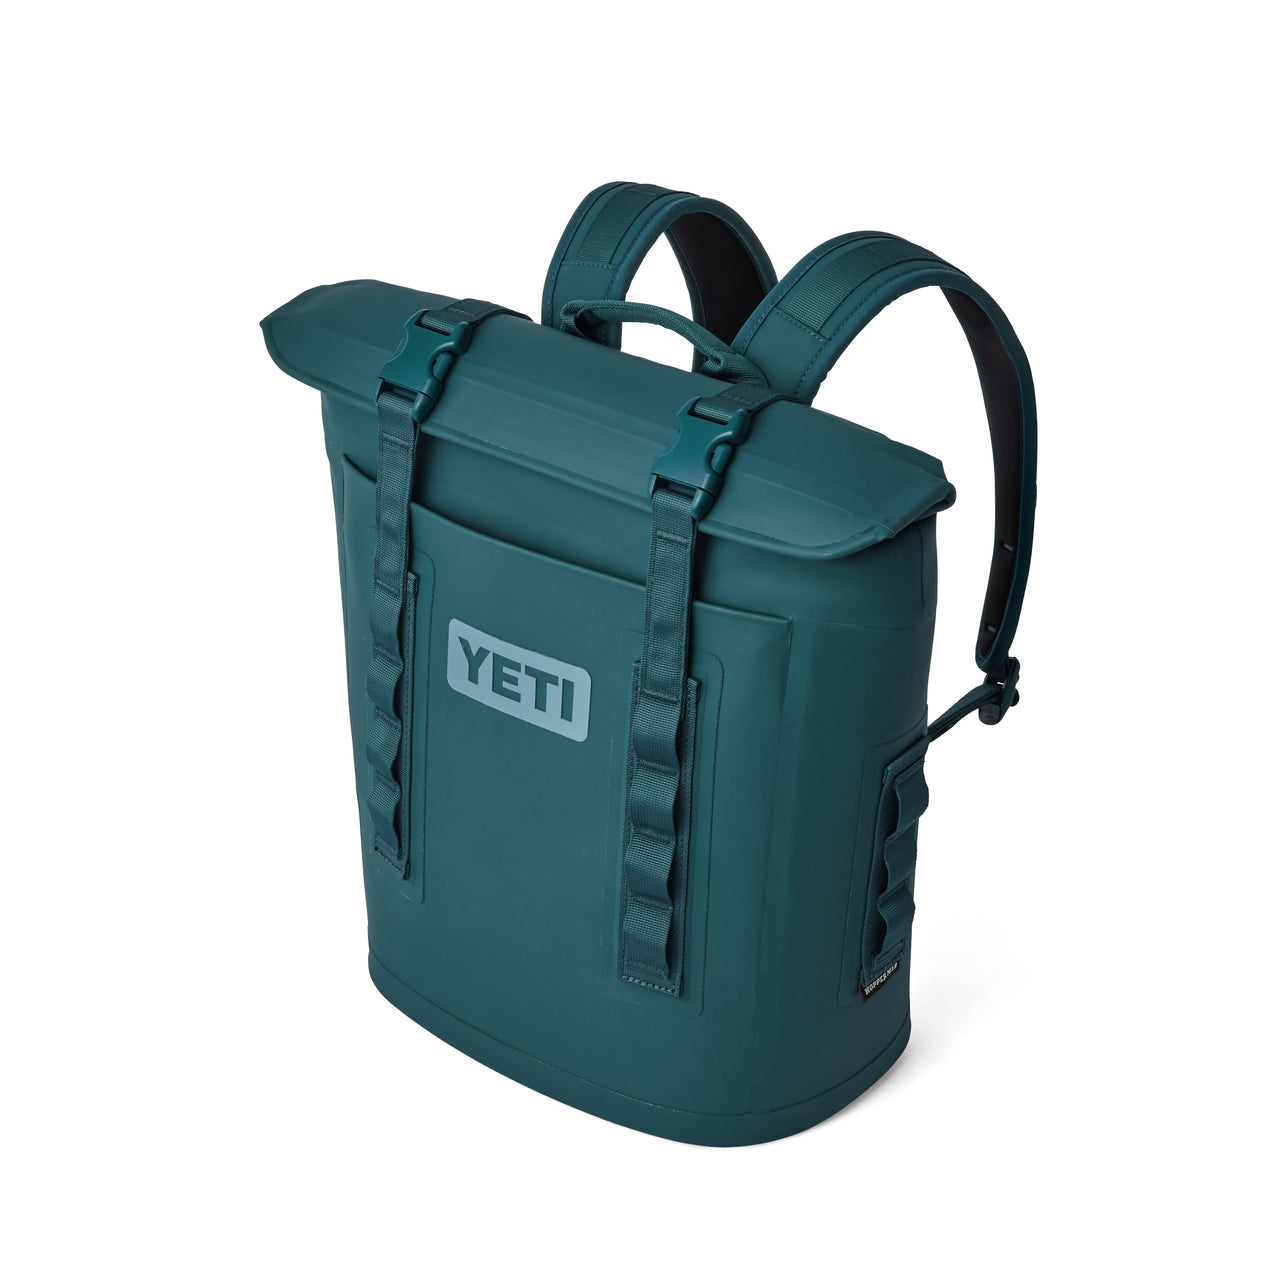 YETI - M12 Cooler Backpack